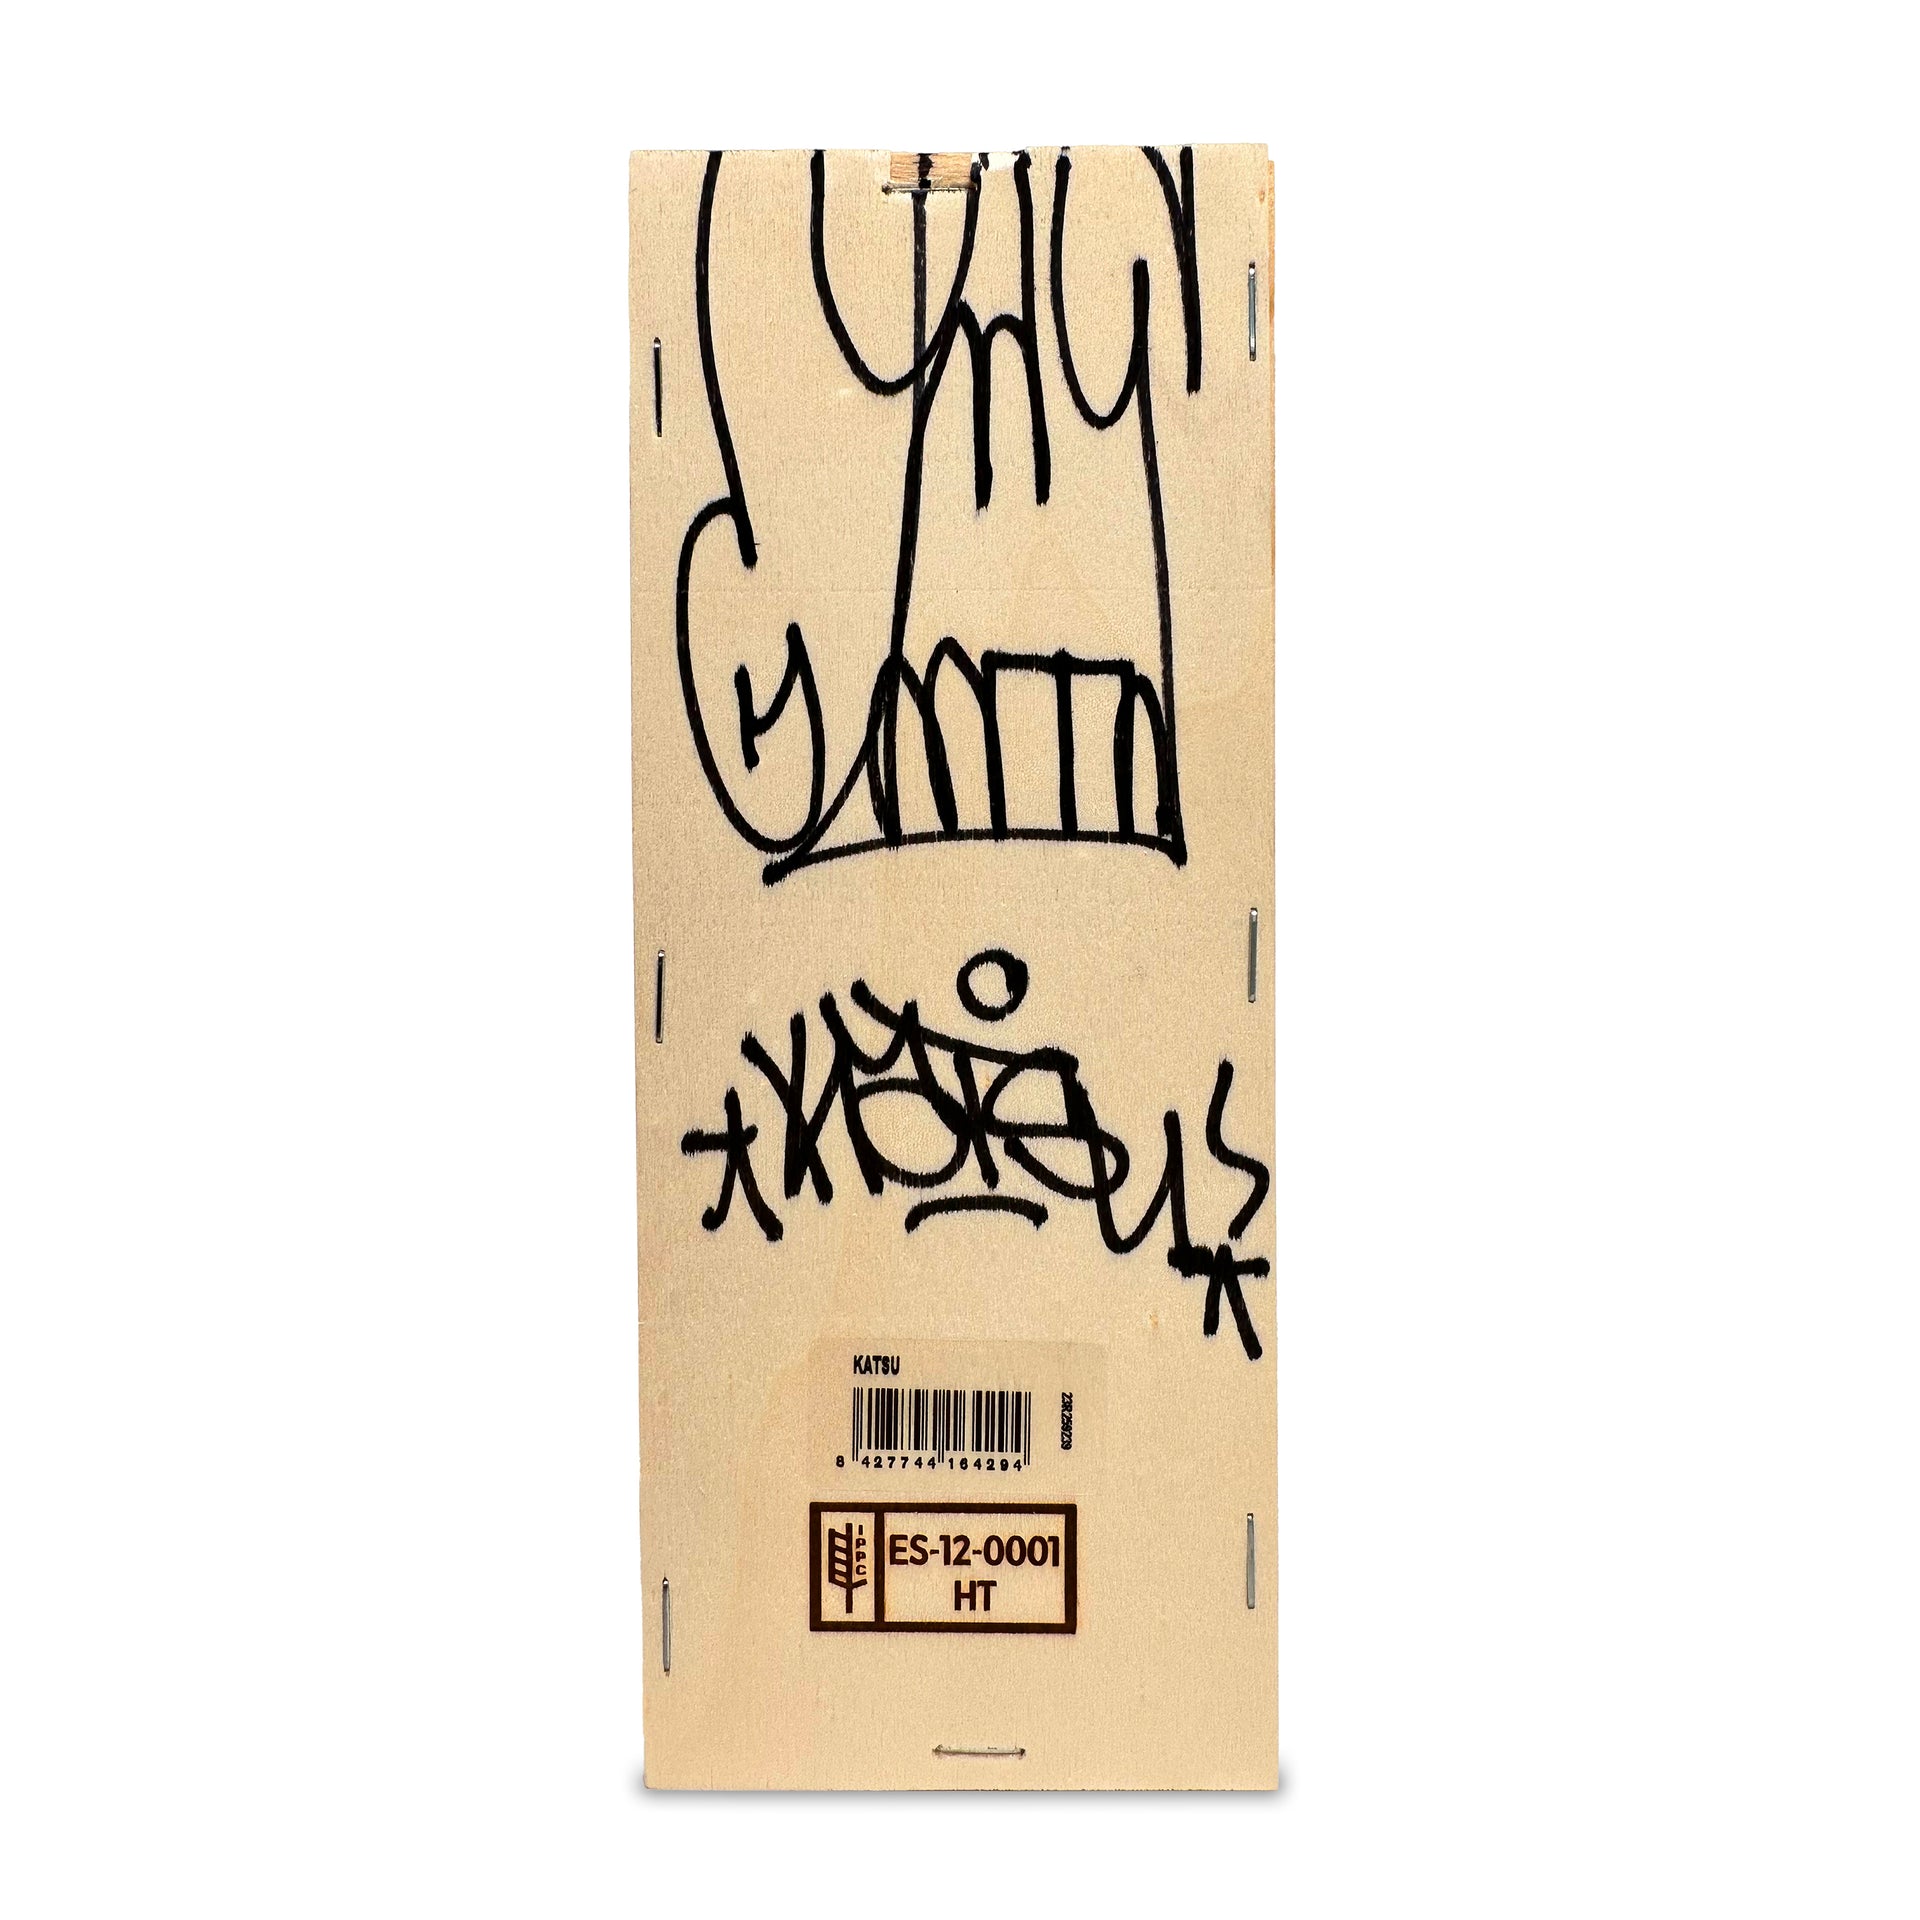 KATSU "Montana Colors Limited Edition" SIGNED Spray Can